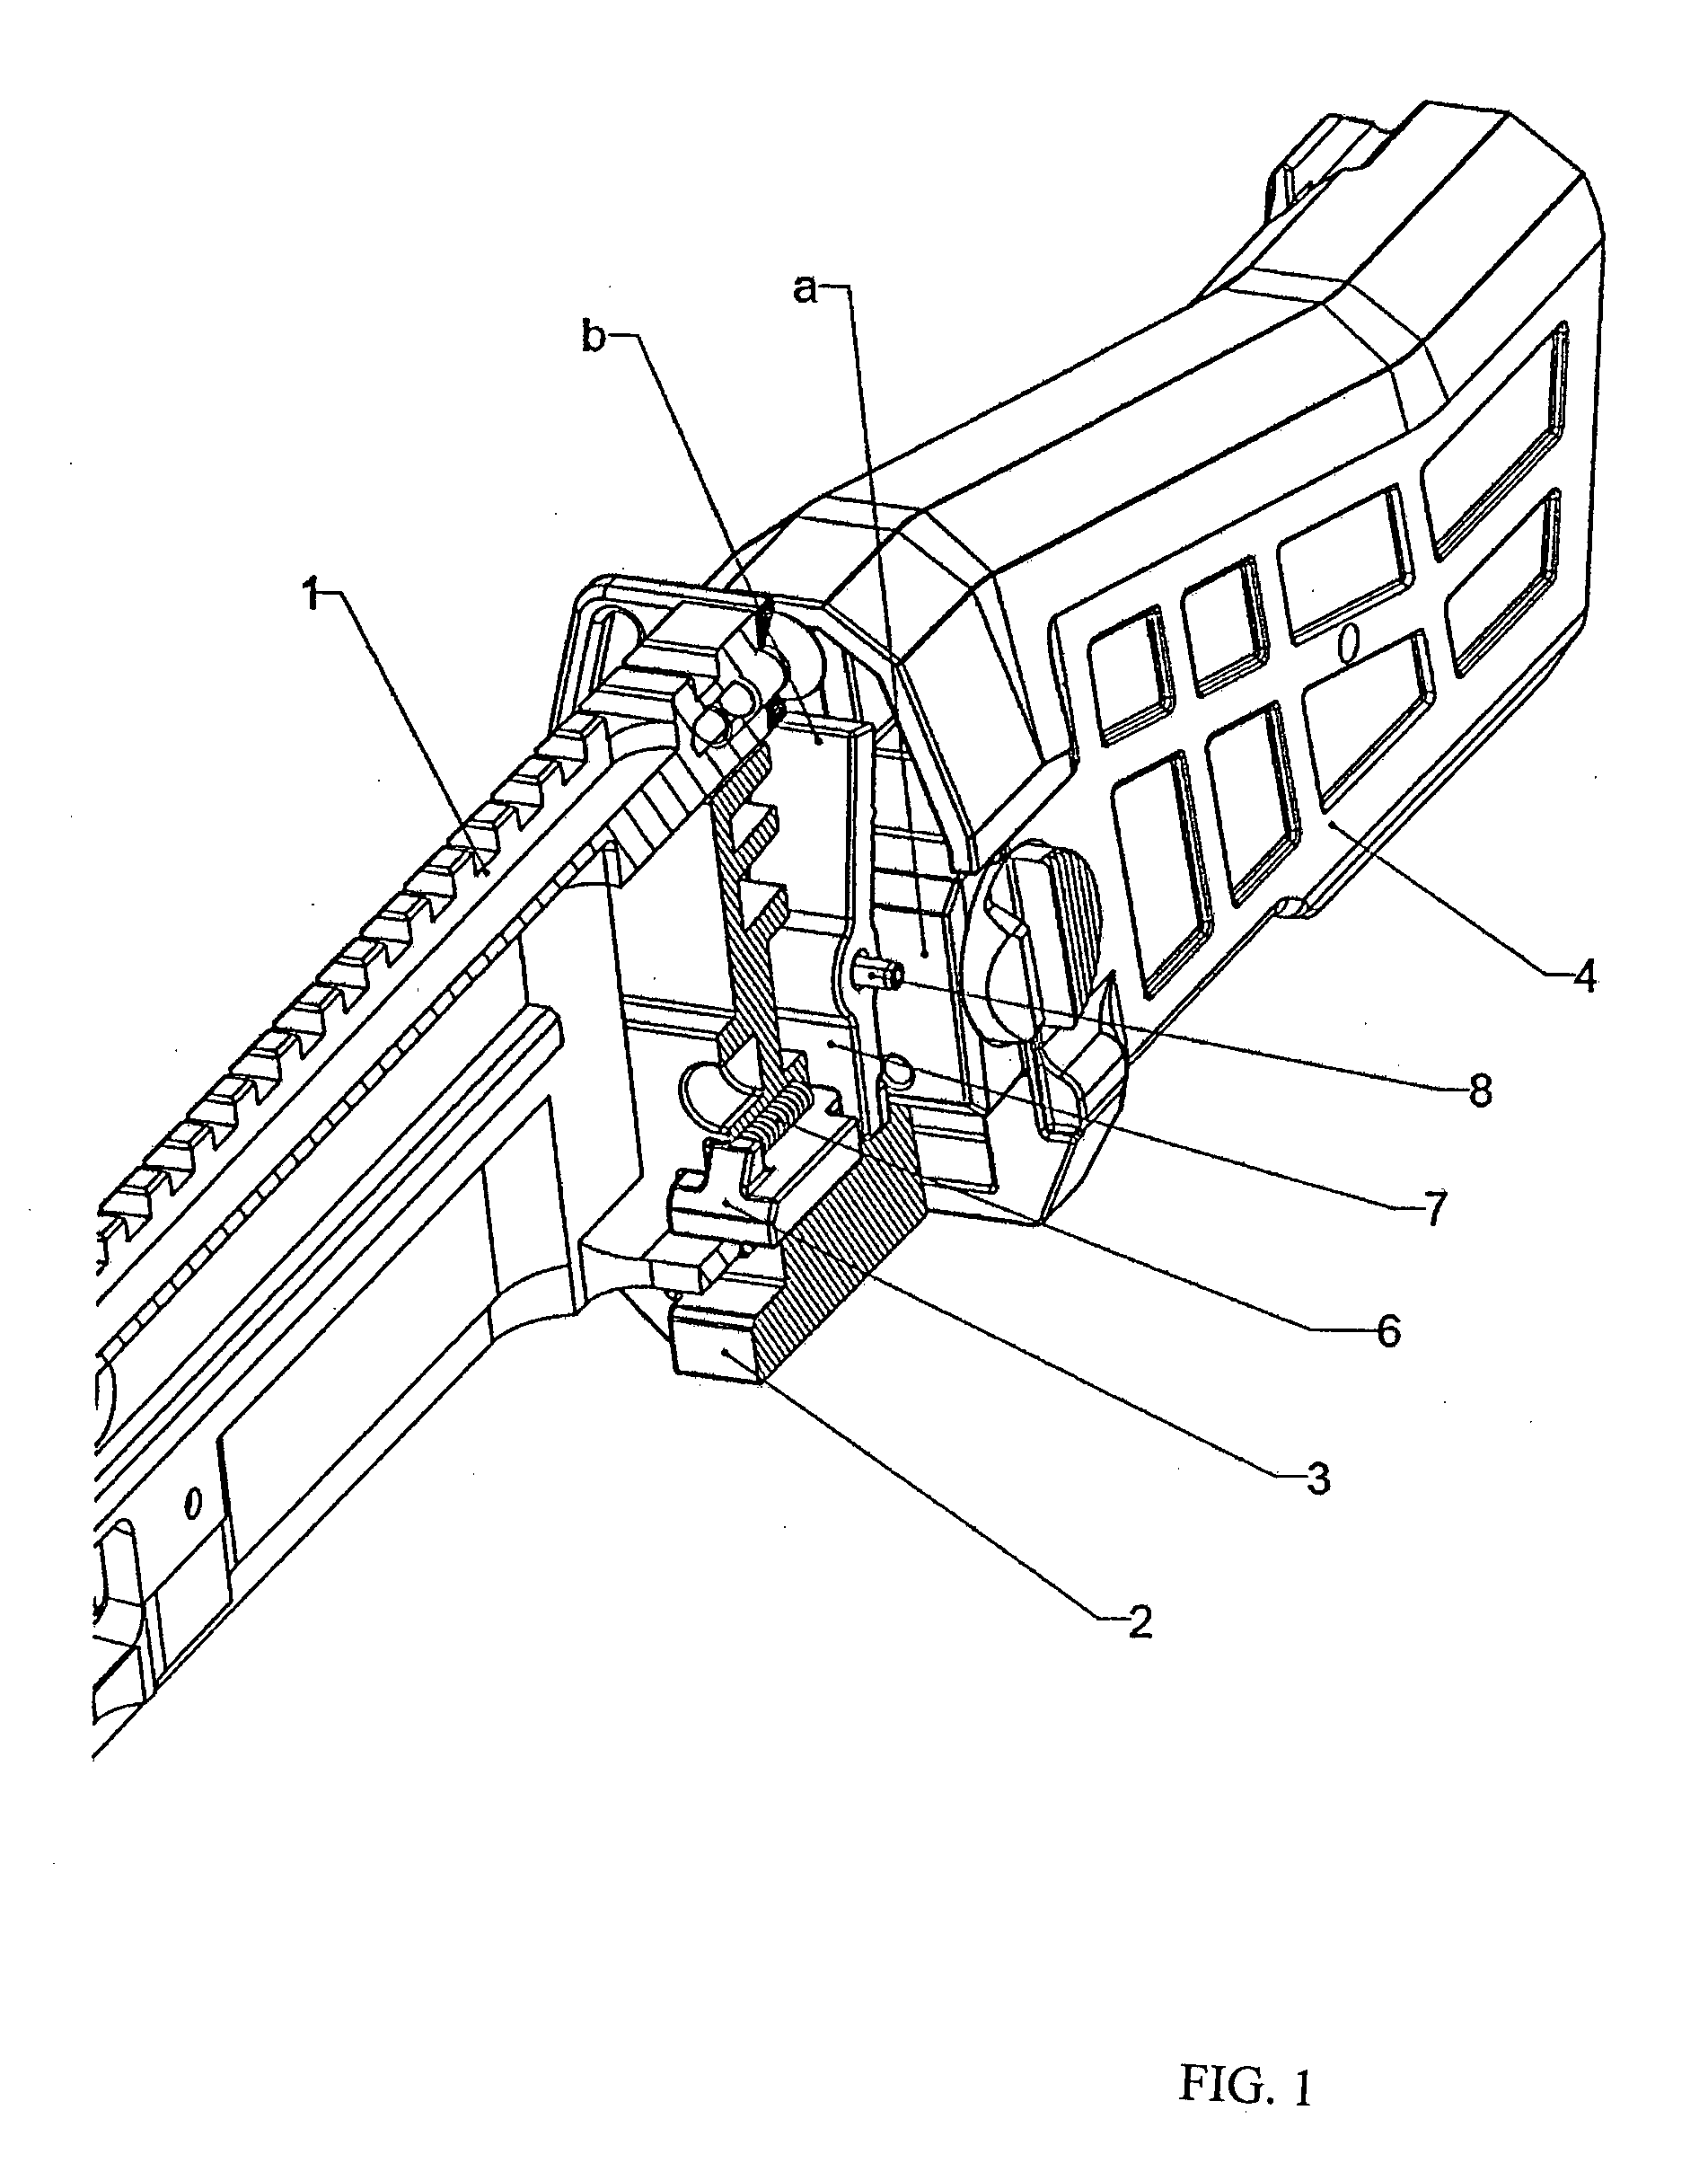 Connecting mechanism for connection of the firearm receiver and the shoulder mount